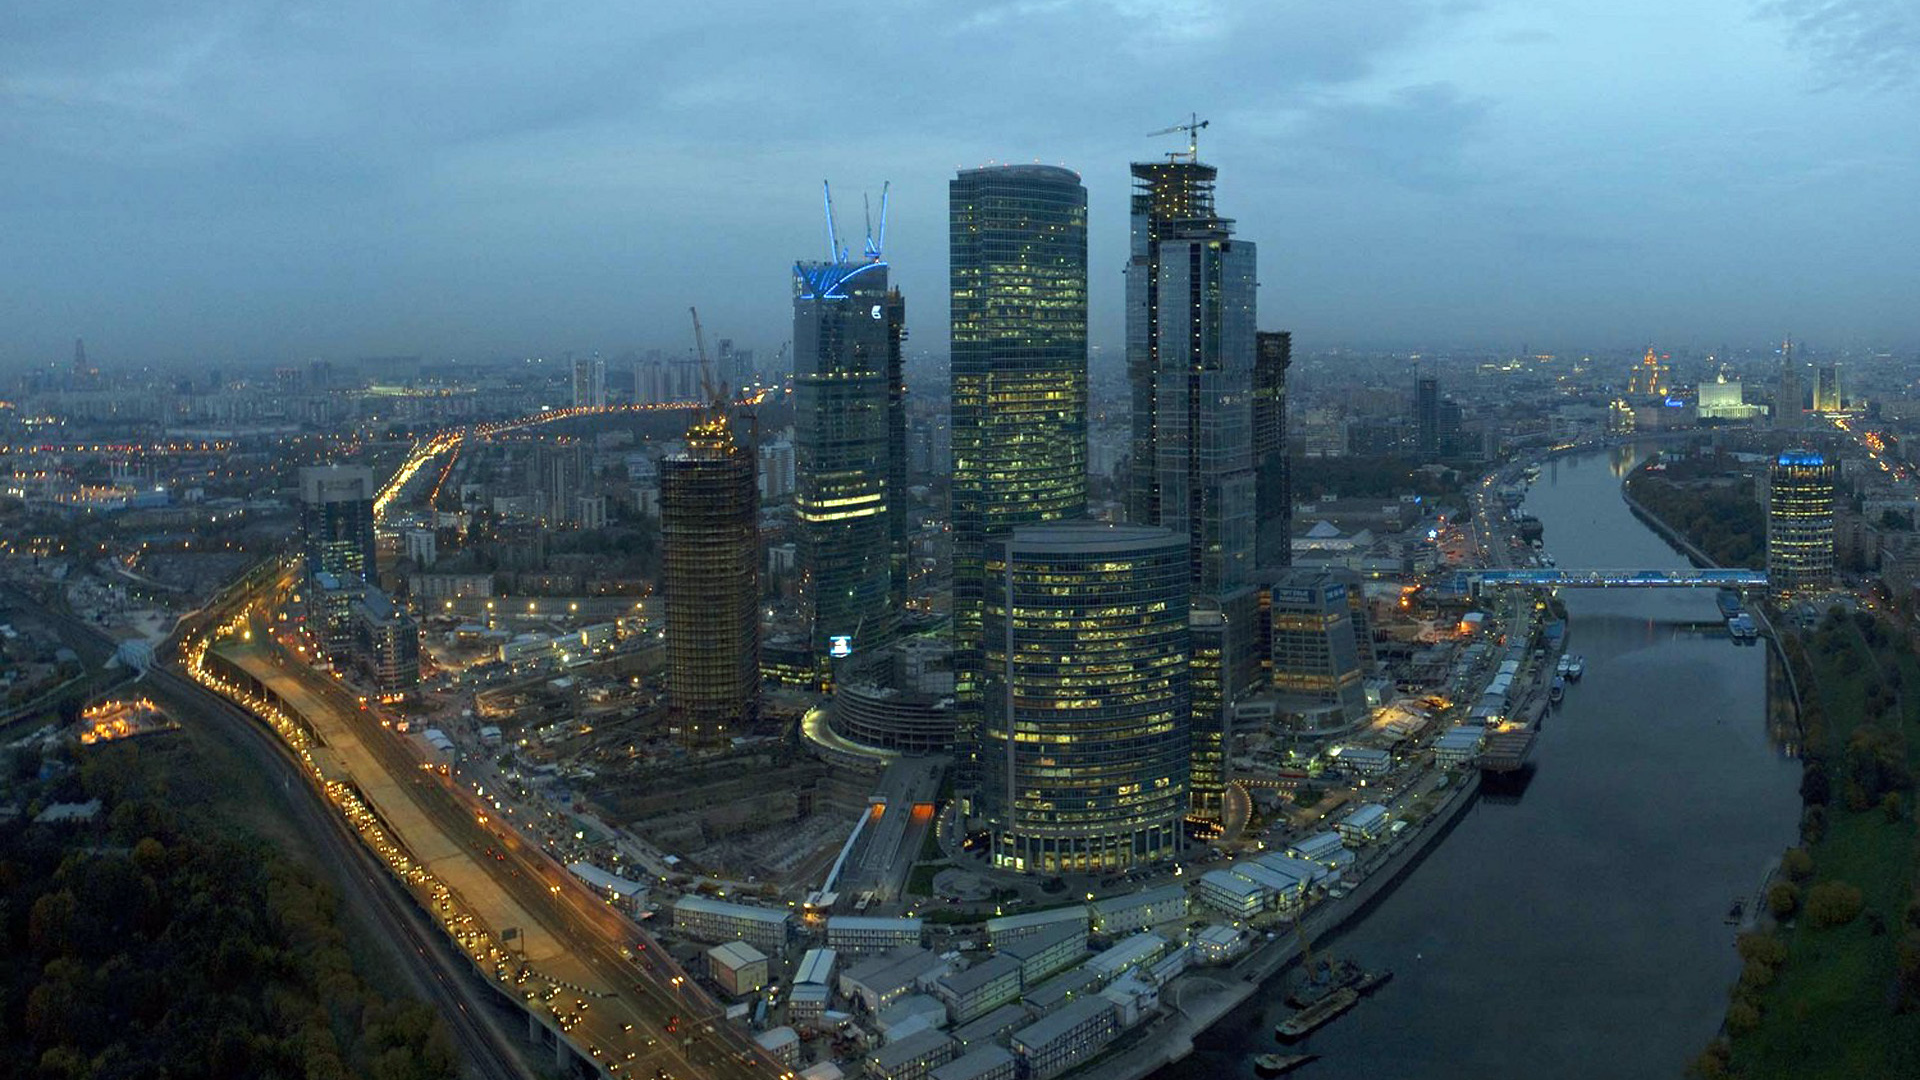 The Moscow Skyscrapers are under construction